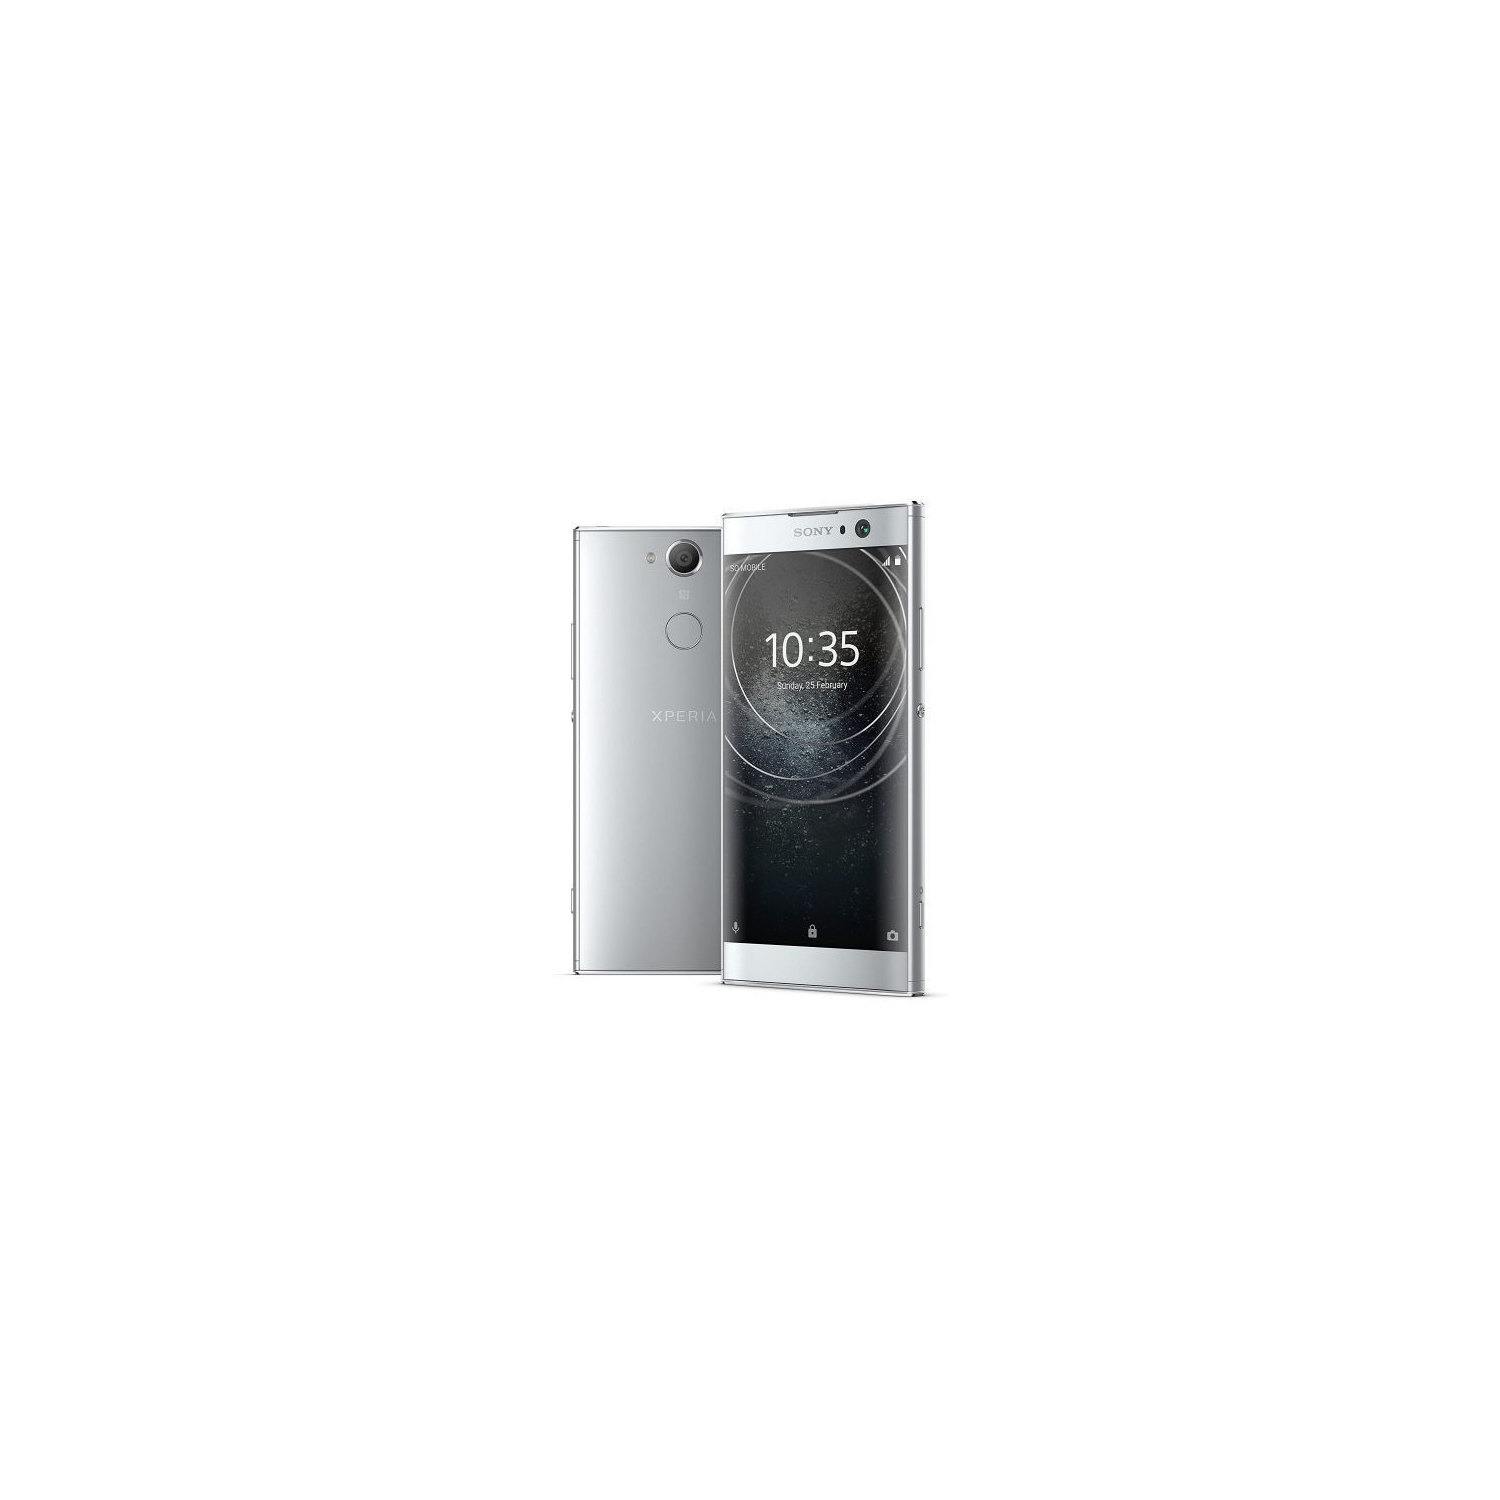 Refurbished (Excellent) - Sony Xperia Xa2 32Gb - Unlocked Smartphone - Silver - Certified Refurbished (Like New)